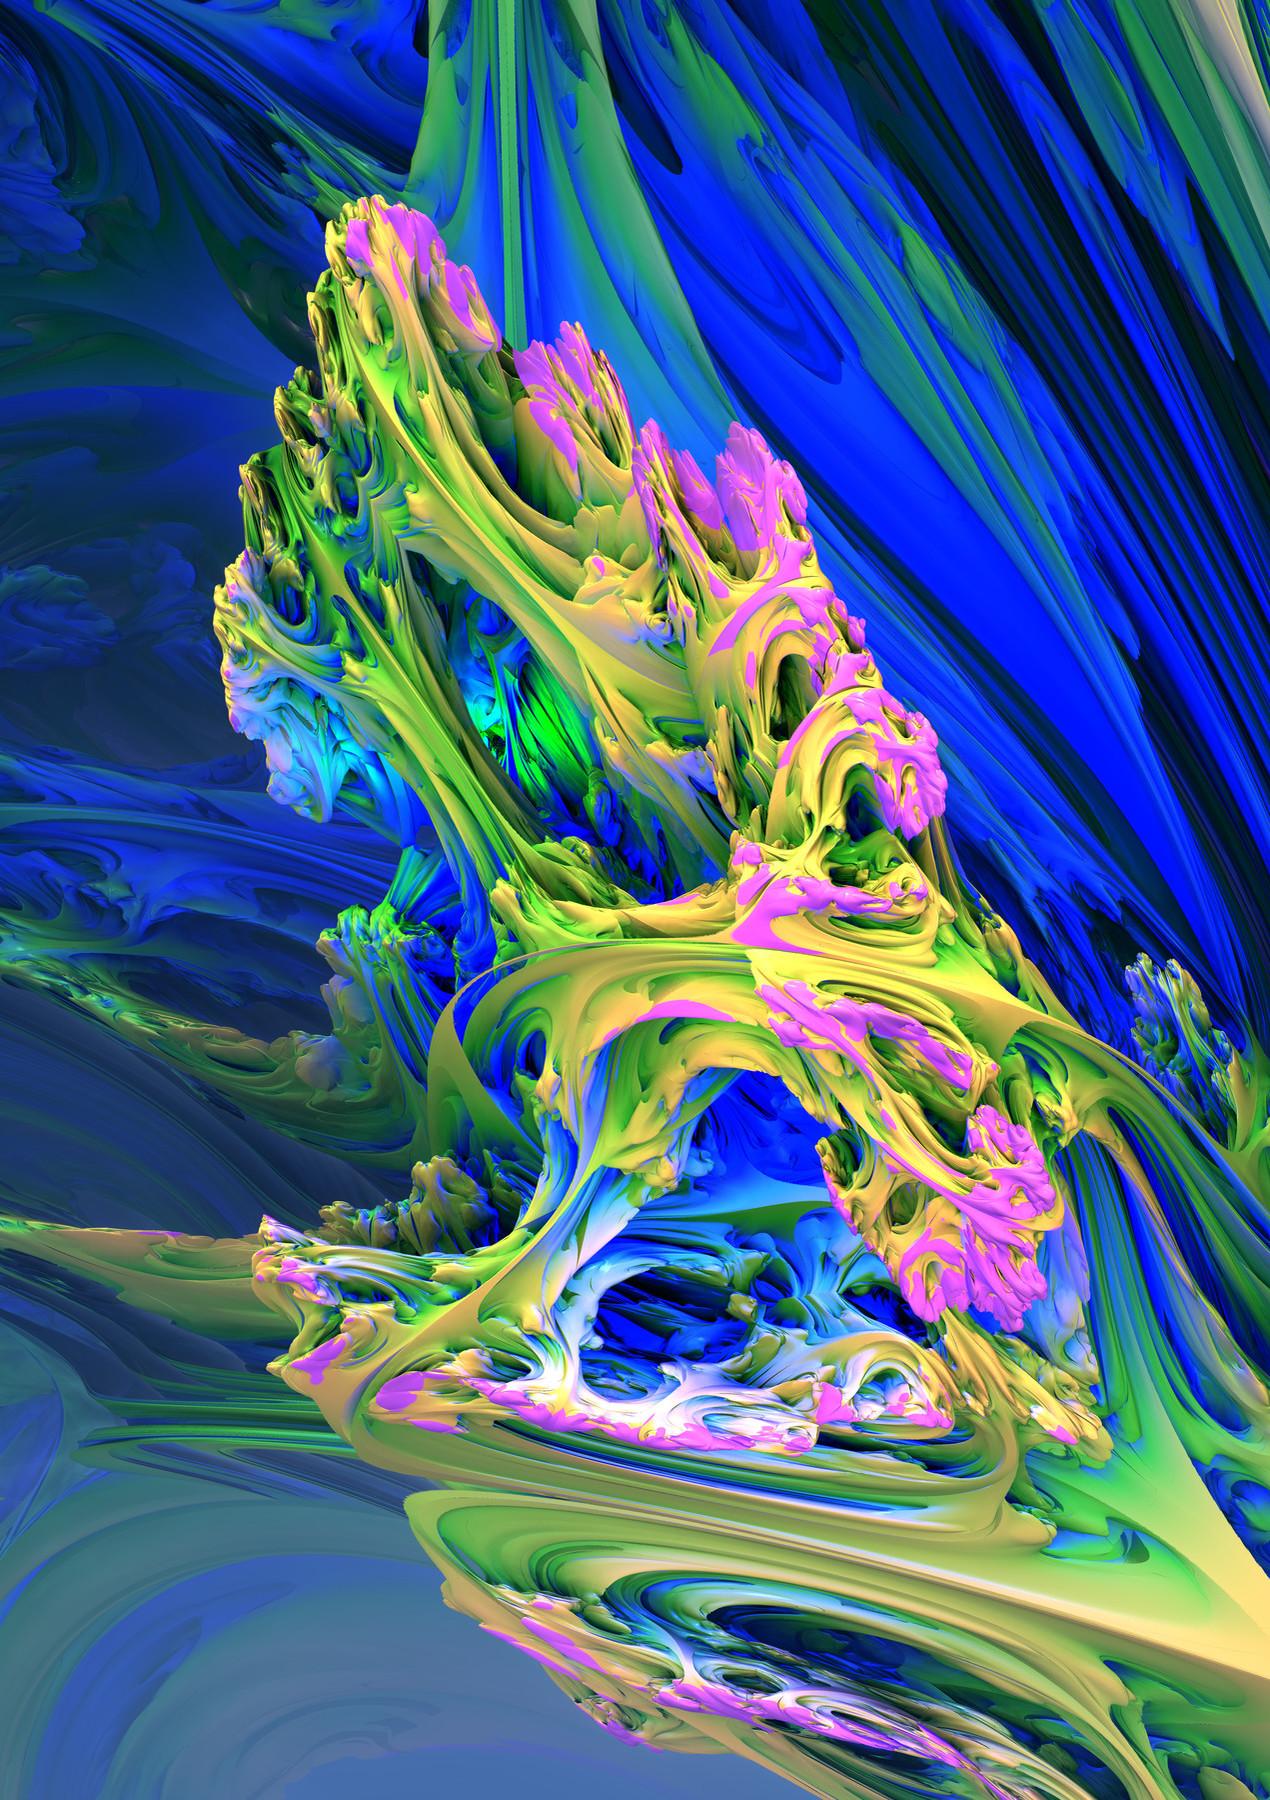 Image for entry 'Colorful Eruption'